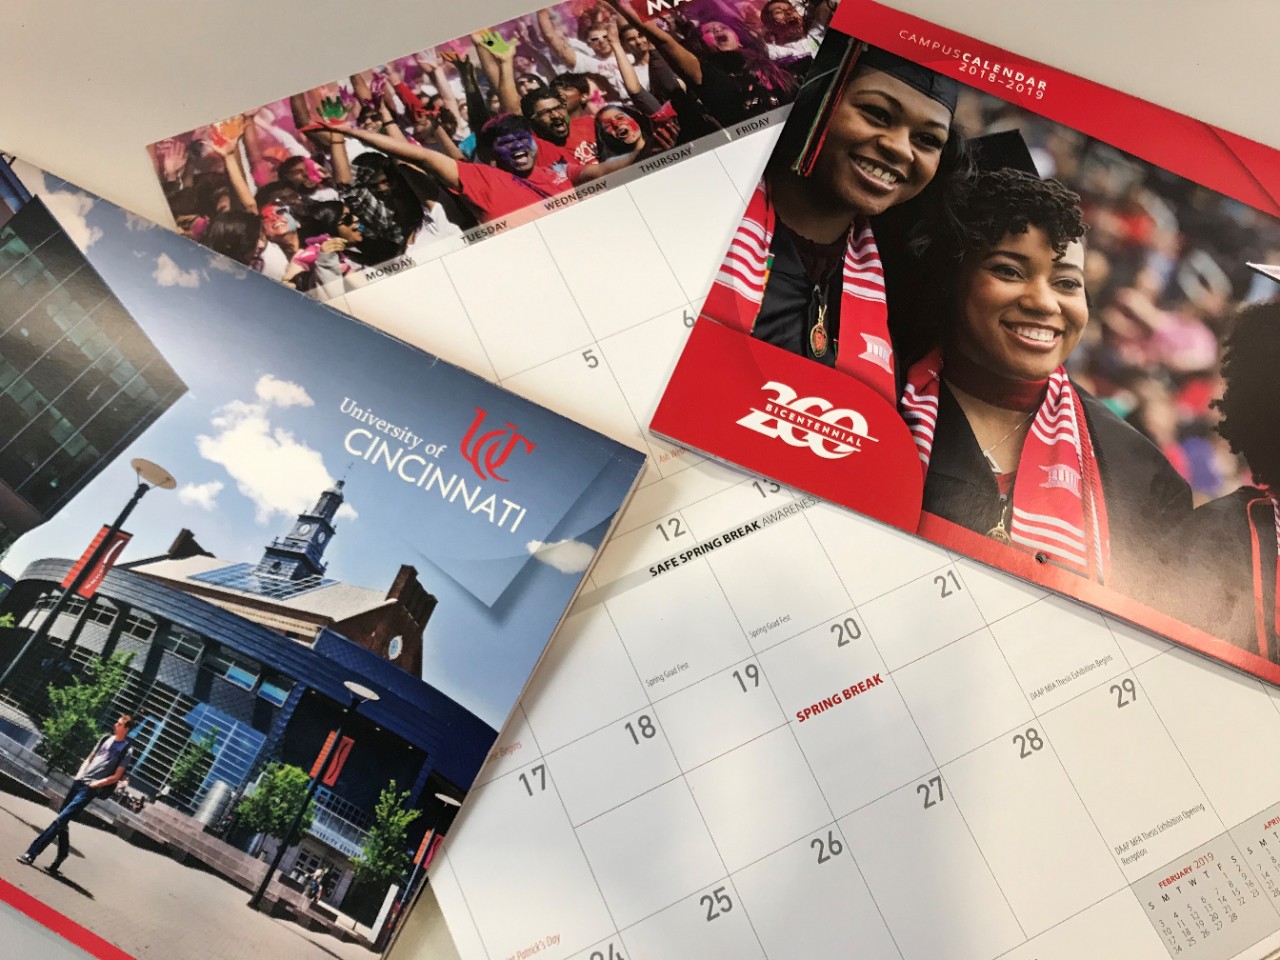 New UC calendars now available for preorder University of Cincinnati